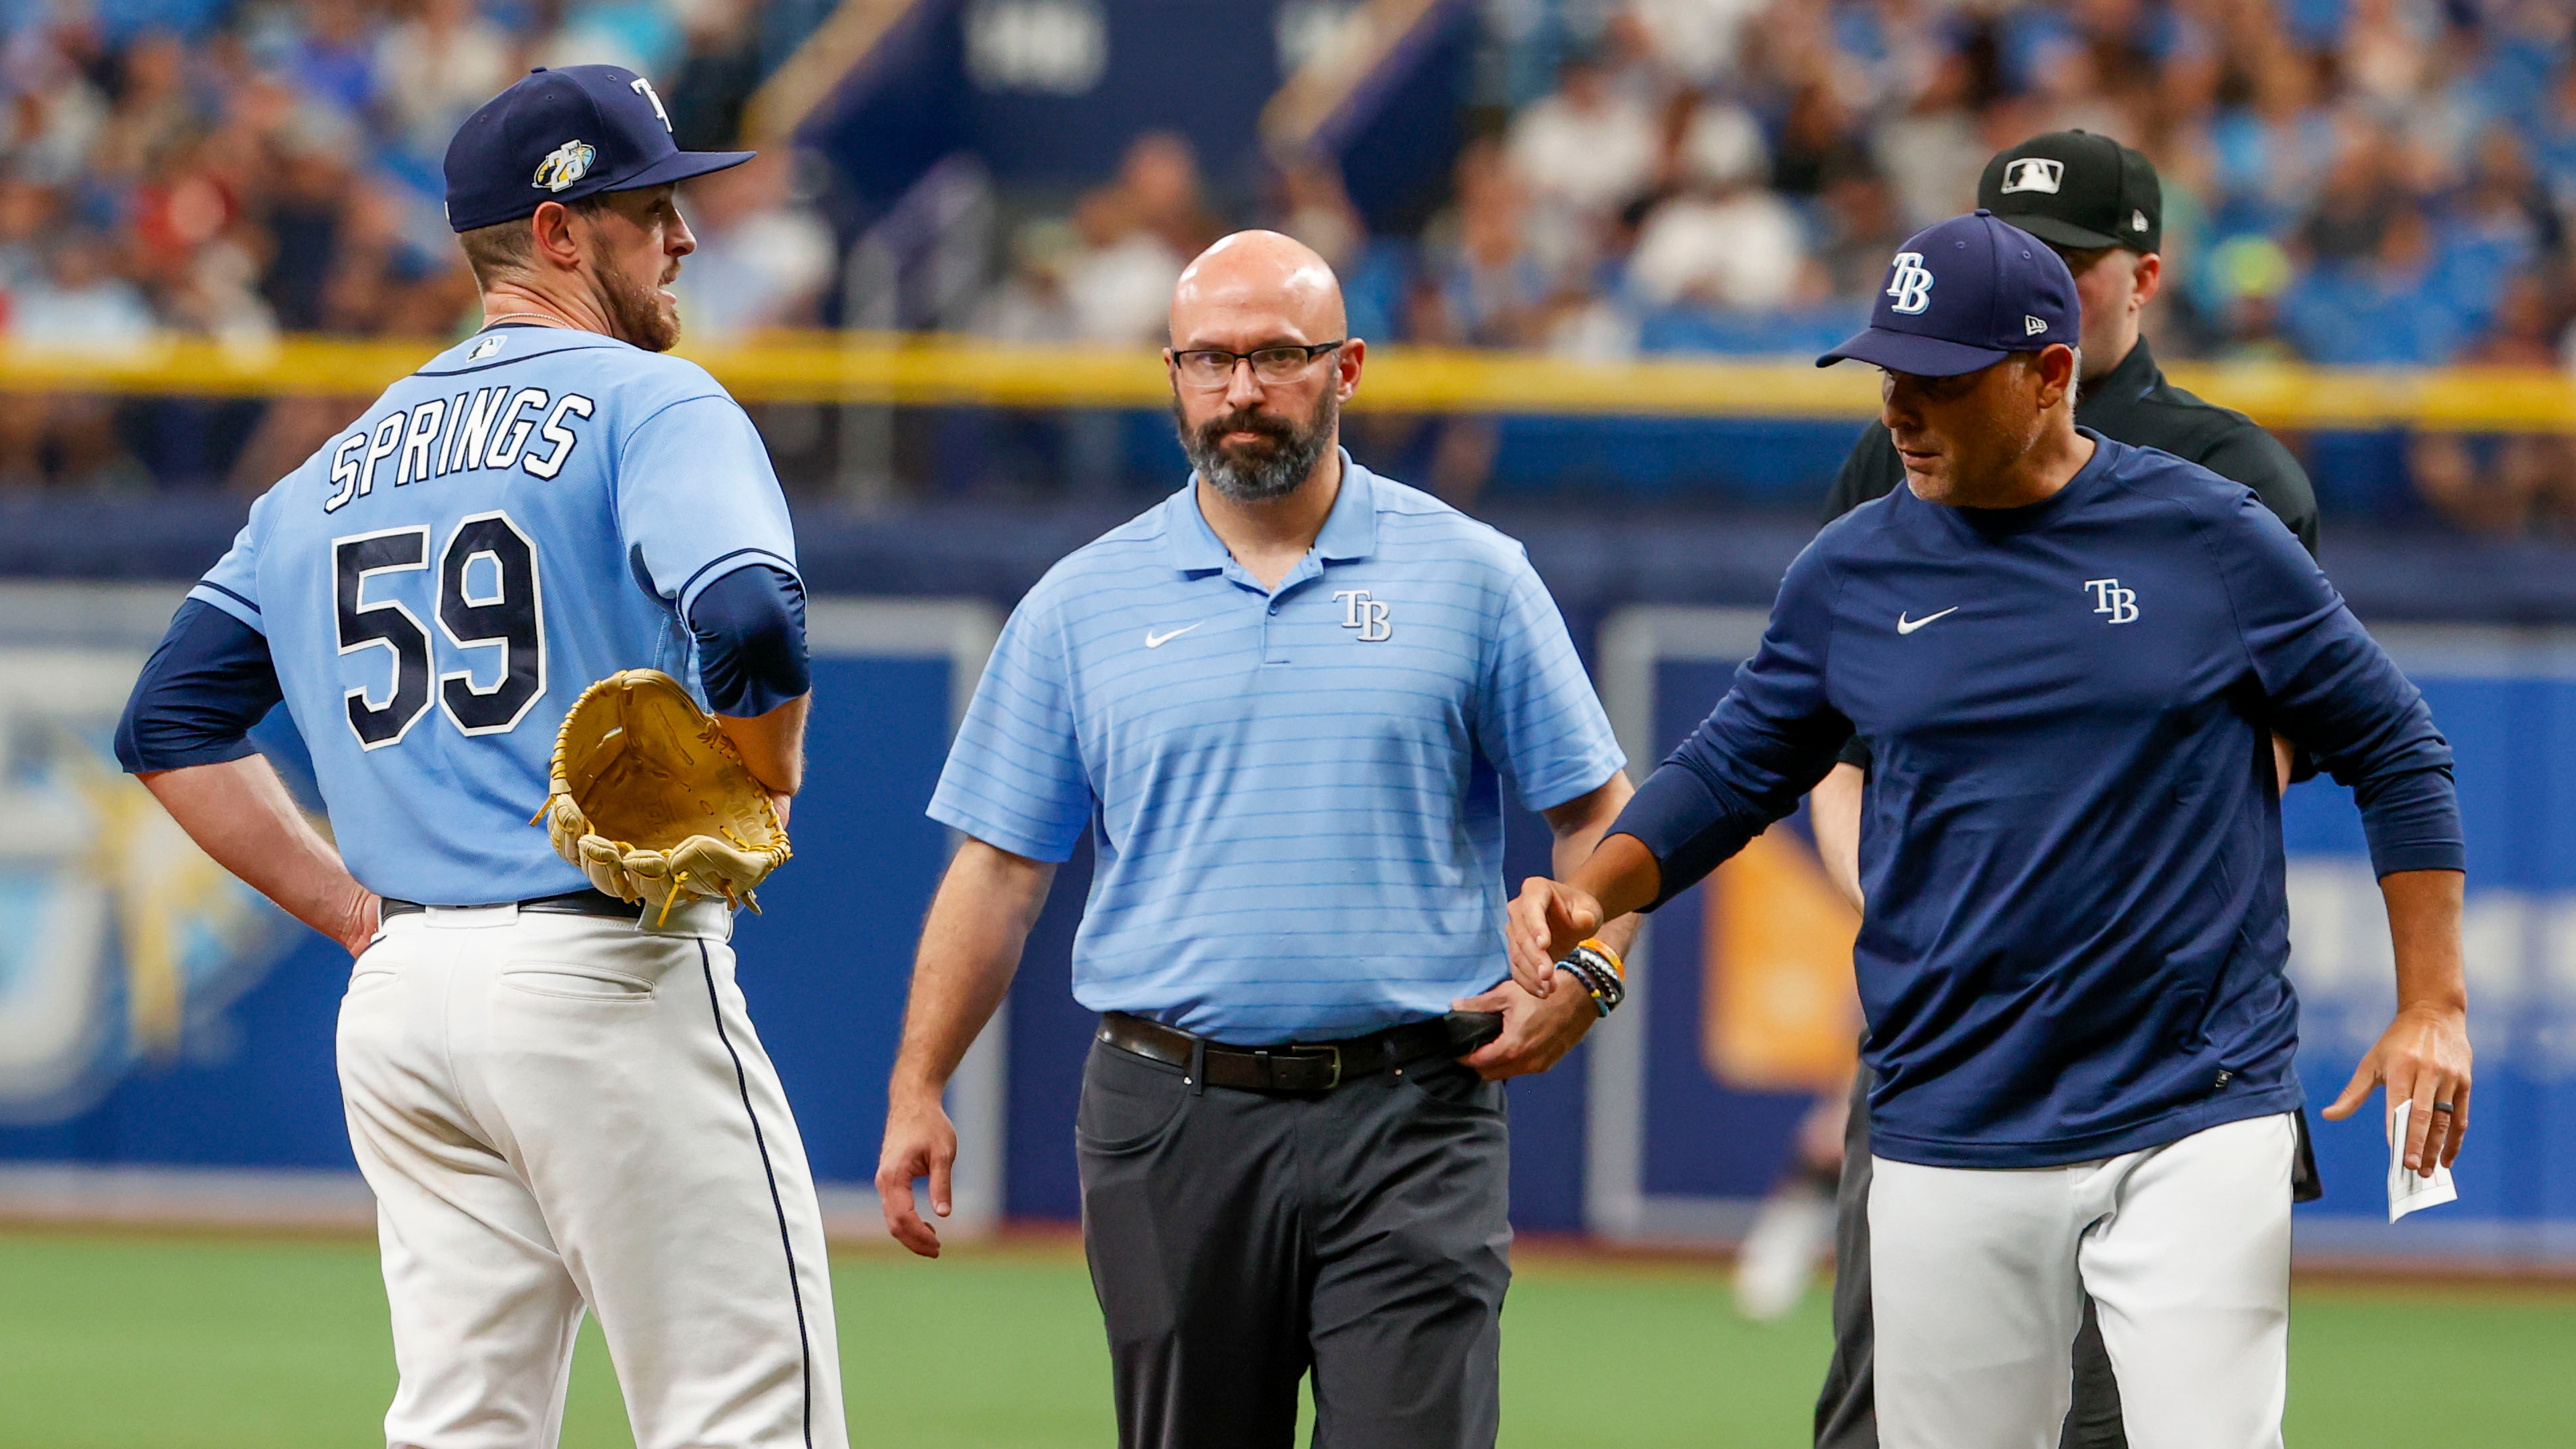 The Rays turned Red Sox castoff Jeffrey Springs into another